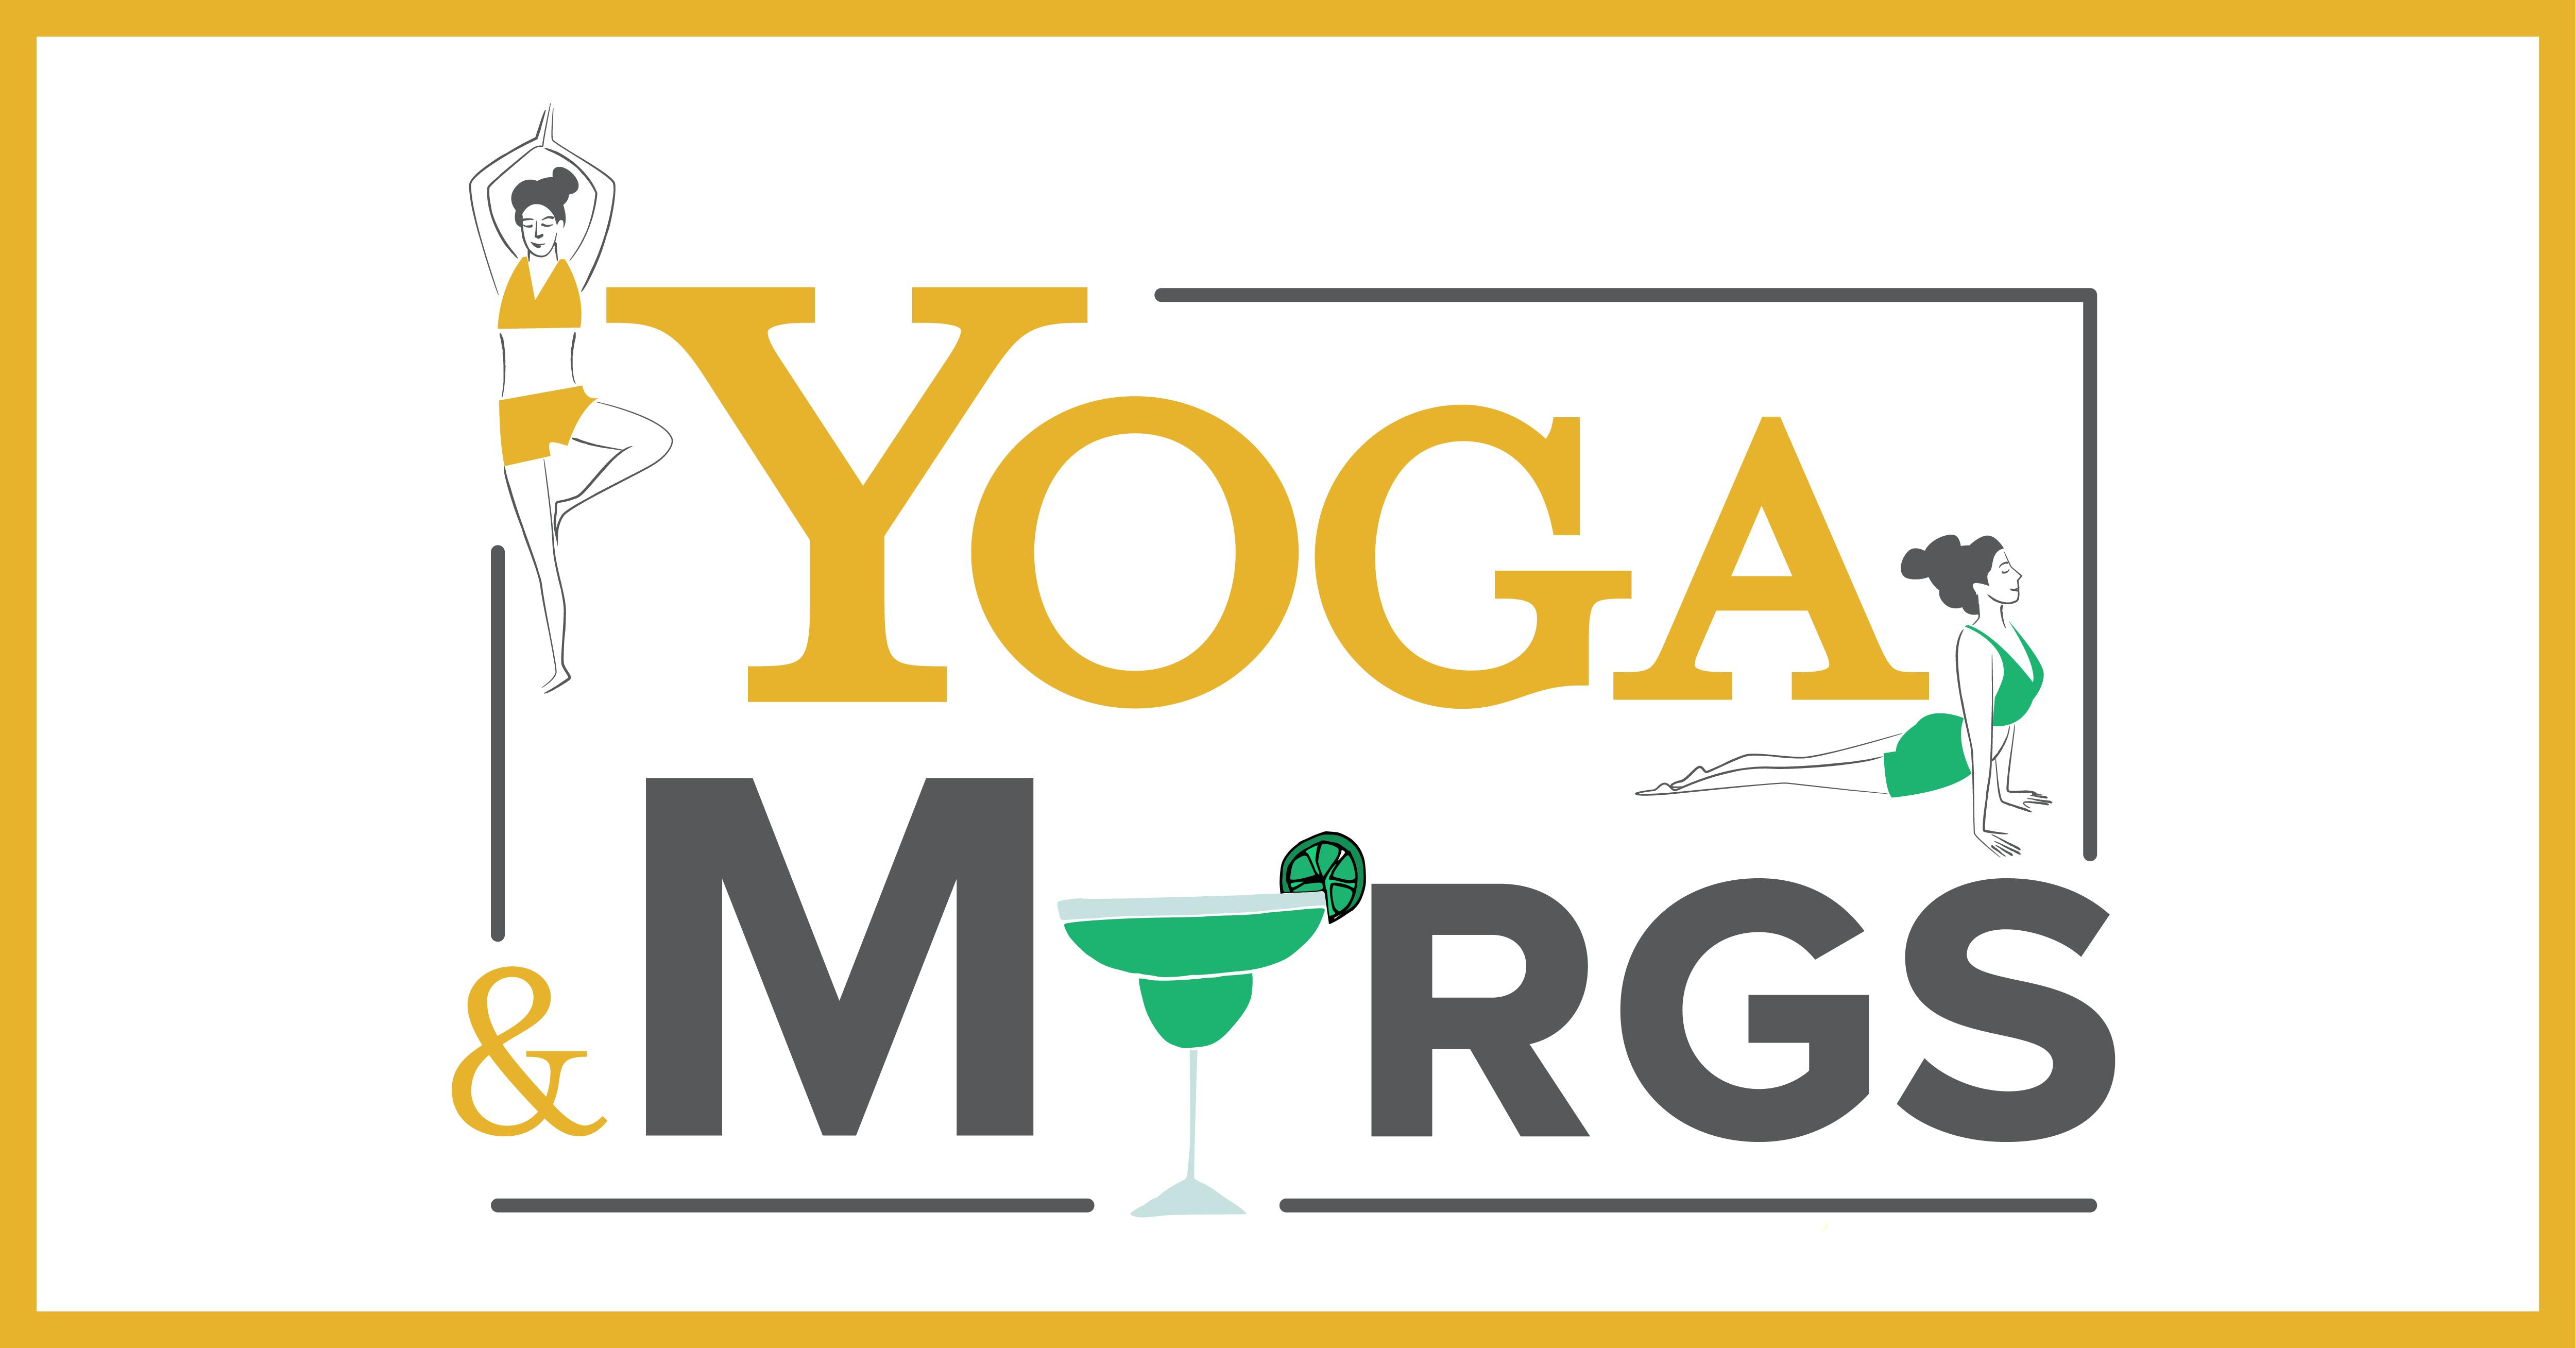 Yoga and Margs at The Orchard Sept 18